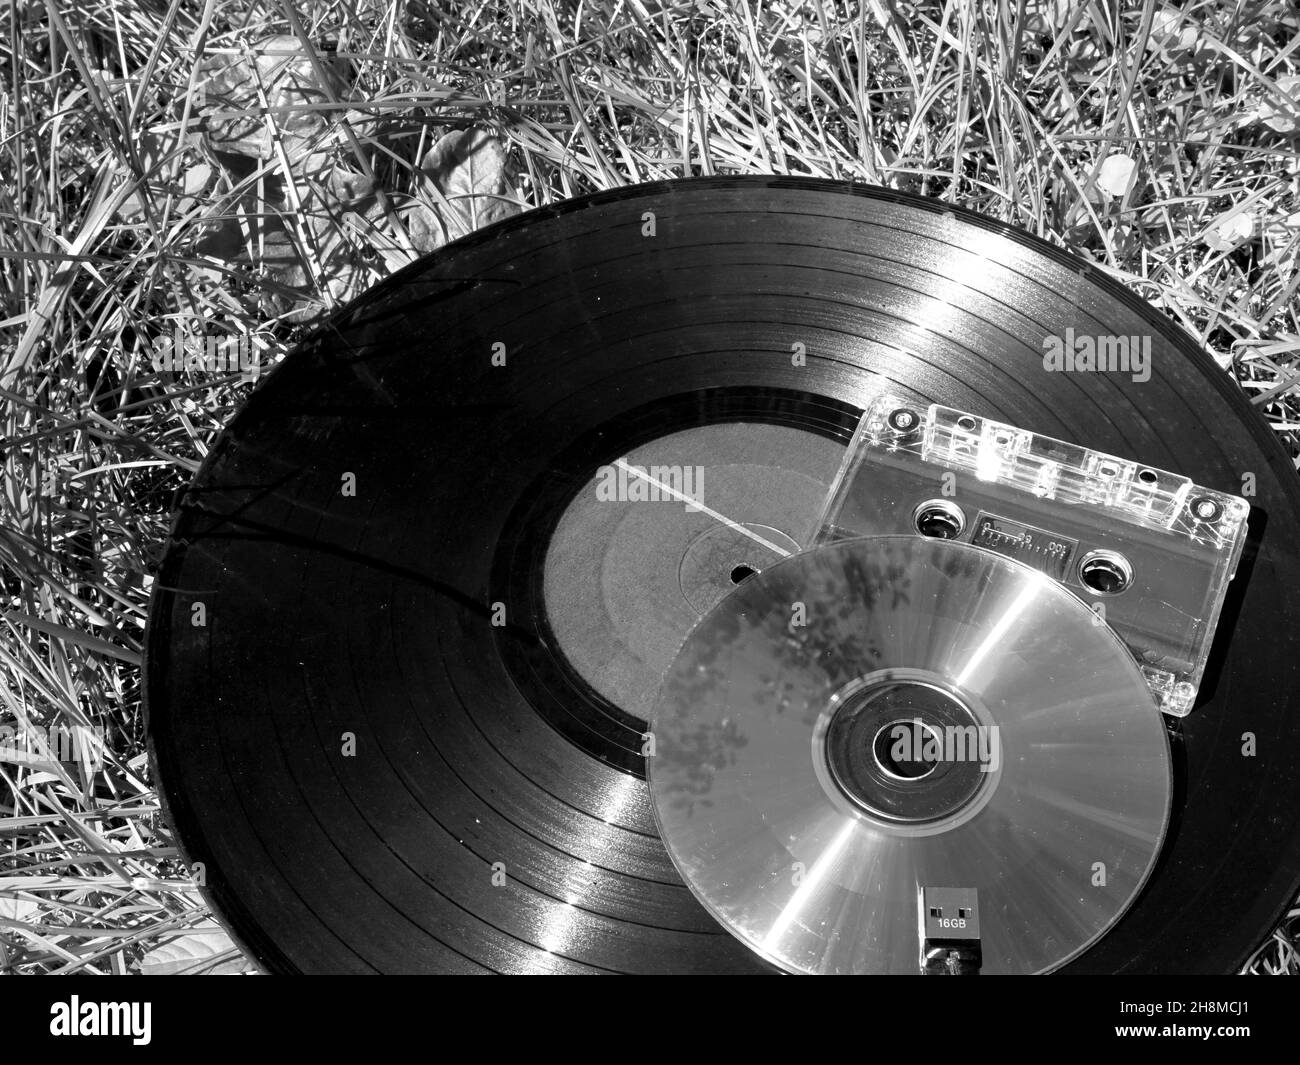 Vinyl record, CD, tape cassette and USB flash drive lay on the grass forgotten by time. Sound evolution concept Stock Photo